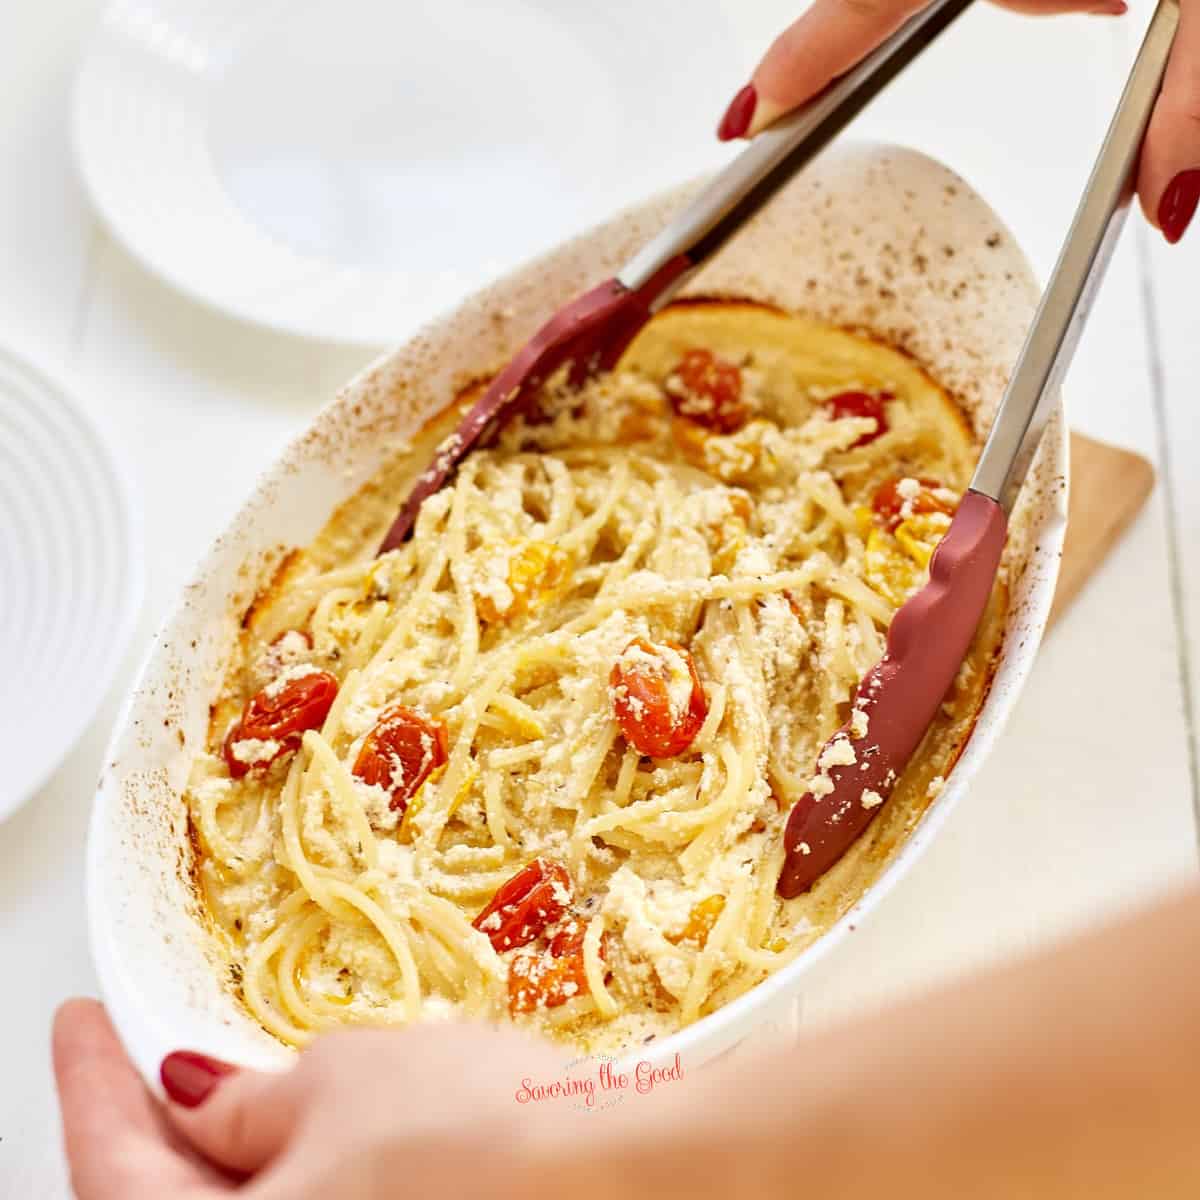 A person is holding a dish of pasta with tomatoes and boursin cheese.